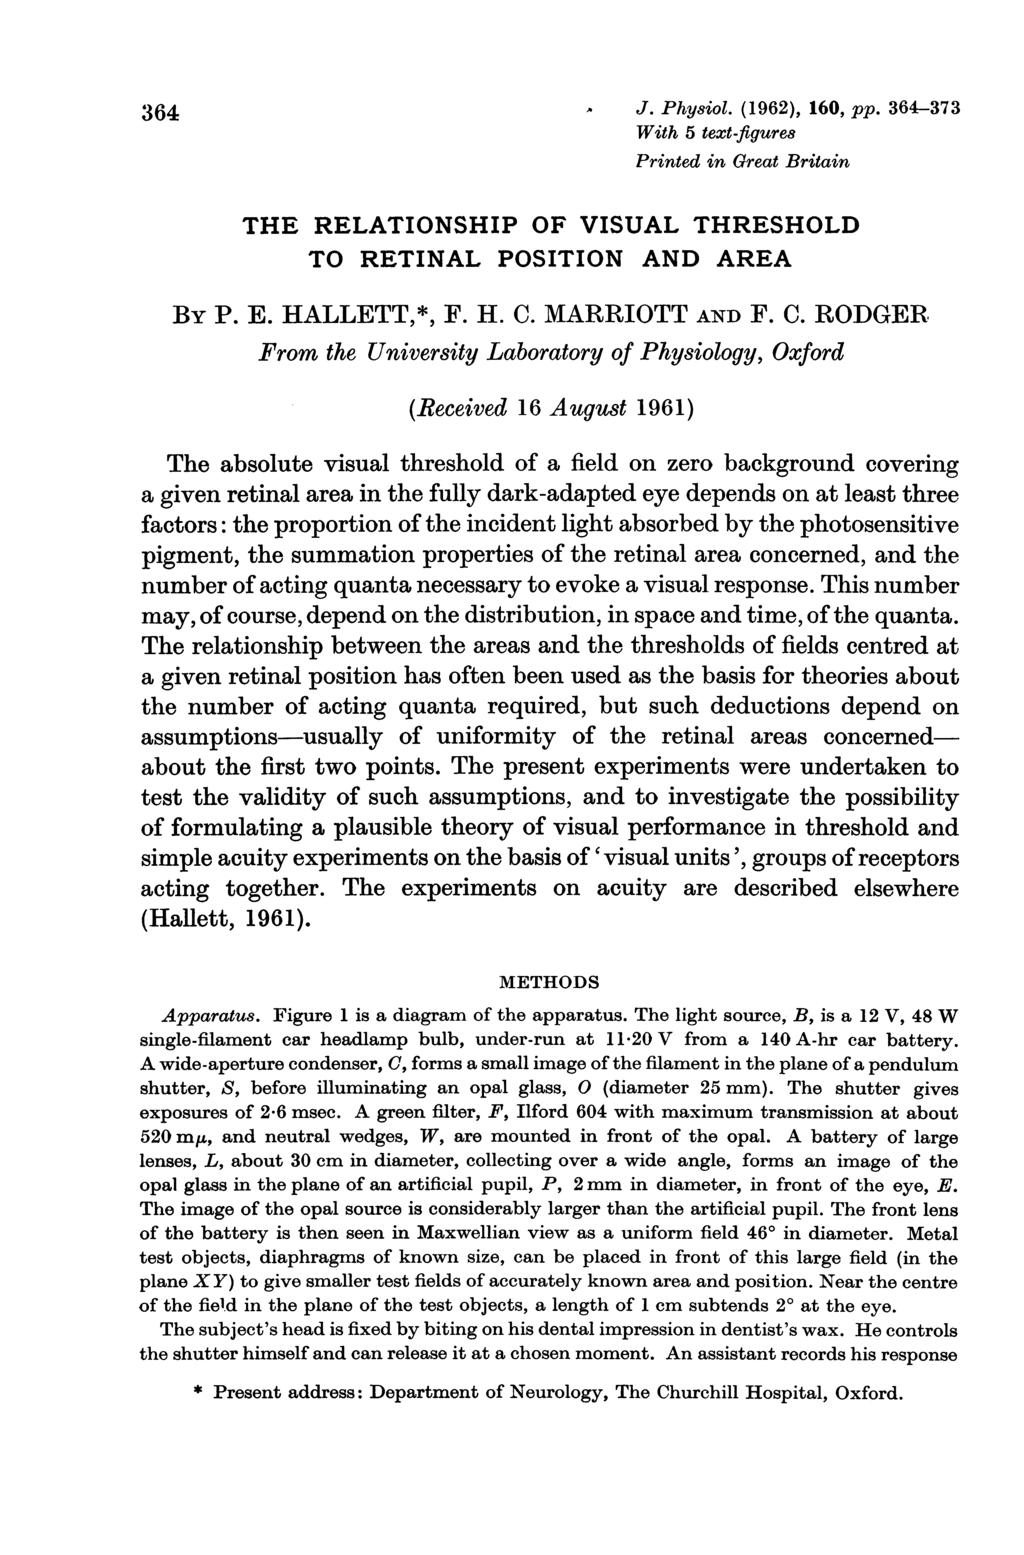 364 J. Physiol. (1962), 16, pp. 364-373 With 5 text-figures Printed in Great Britain THE RELATIONSHIP OF VISUAL THRESHOLD TO RETINAL POSITION AND AREA By P. E. HALLETT,*, F. H. C.